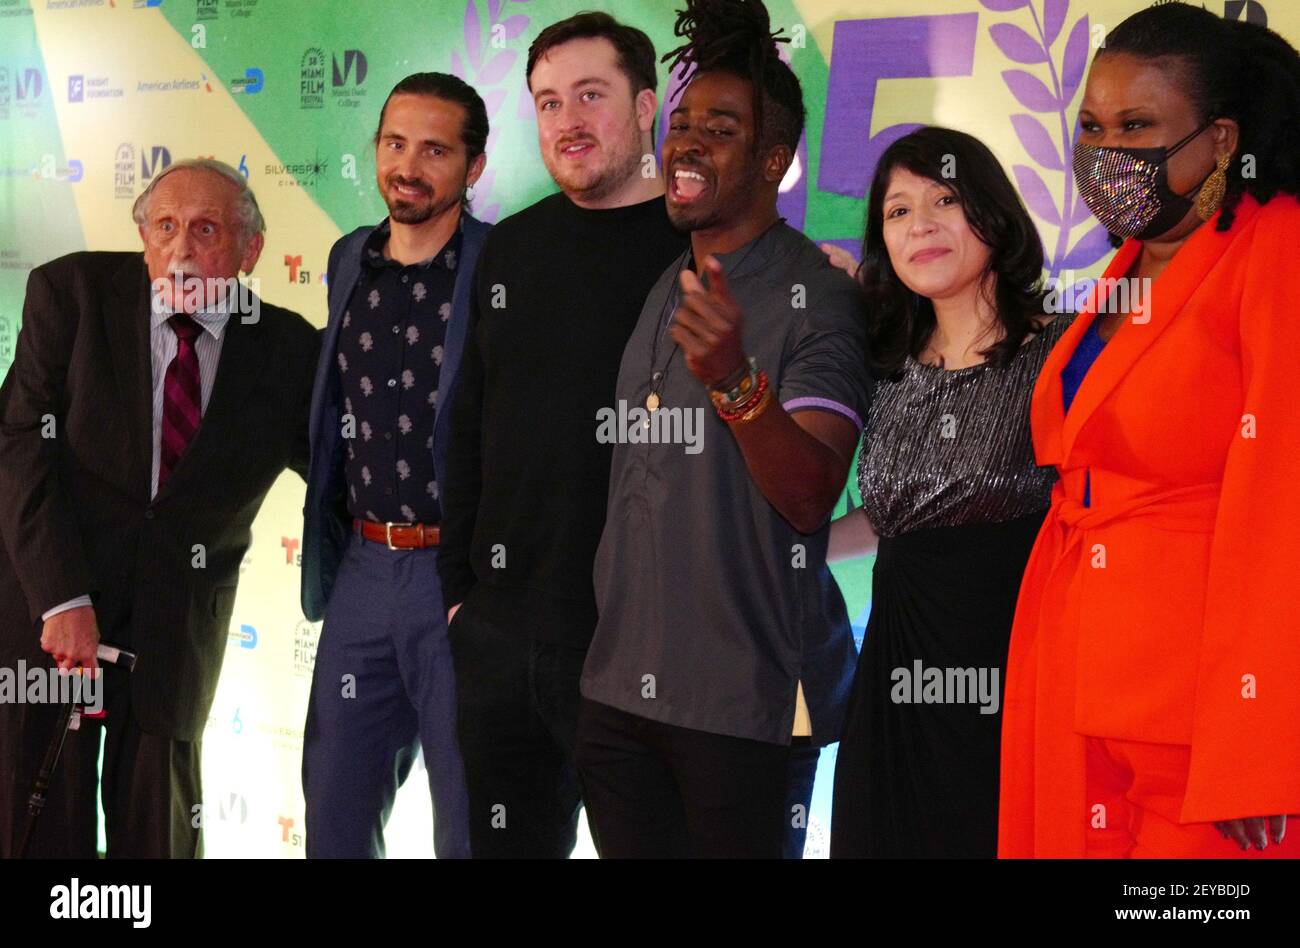 Miami, United States. 05th Mar, 2021. (L-R) Alan Myles Heyman, Mark Pulaski, Jonathan Cuartas, Edson Jean, Fabiola Rodriguez, and Kerline Alce walk the red carpet at the Miami Dade College's 38th Annual Miami Film Festival Opening Night and World Premiere of LUDI at the Silverspot Cinema in Miami, Florida, Friday, March 5, 2021. Photo by Gary I Rothstein/UPI Credit: UPI/Alamy Live News Stock Photo